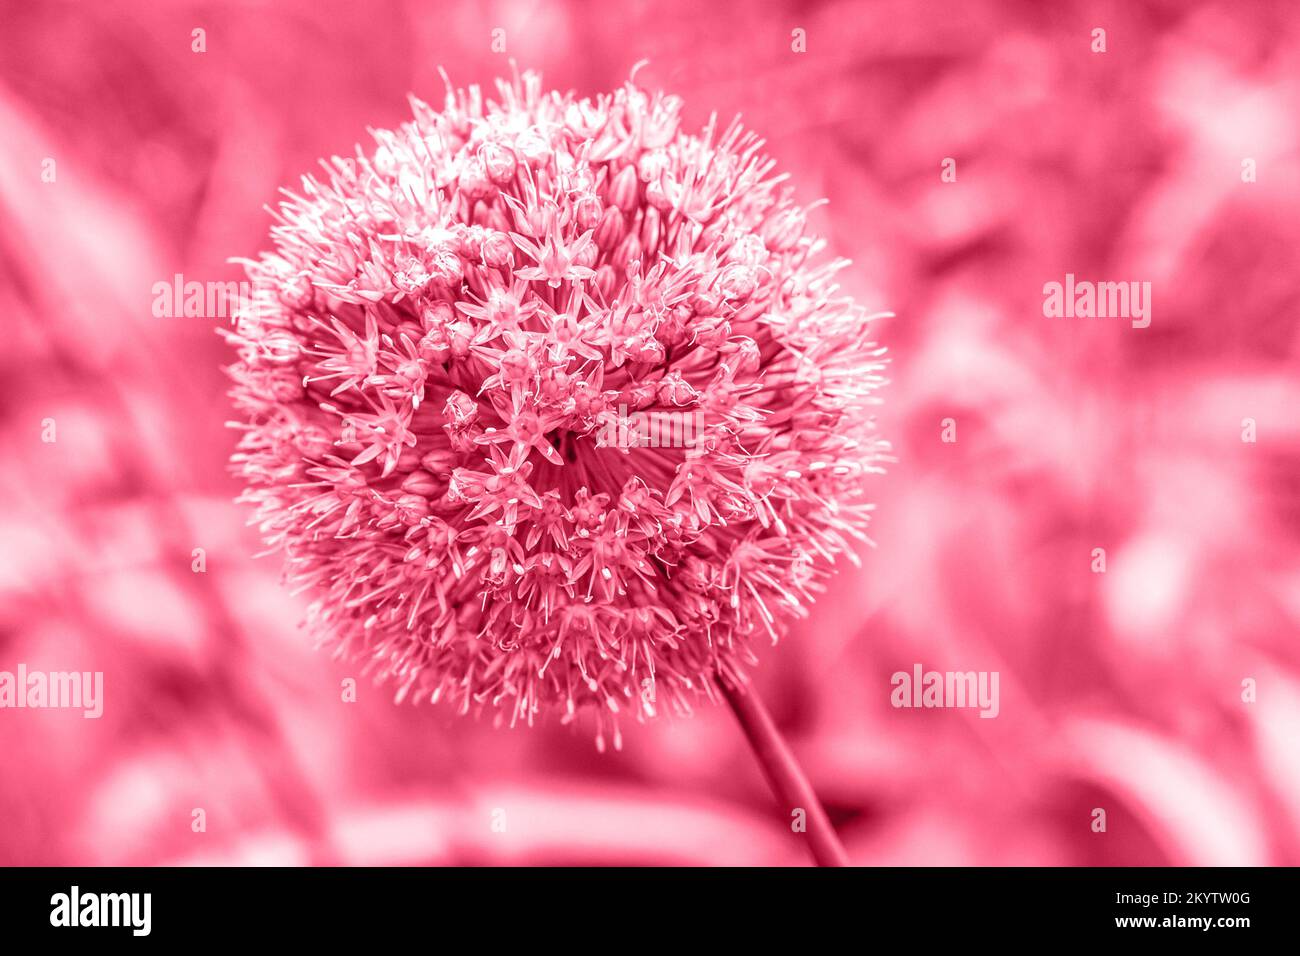 Trendy color of the year 2023. Flower of globular shape toned in viva magenta color. Decorative bulbous perennial plant. Stock Photo